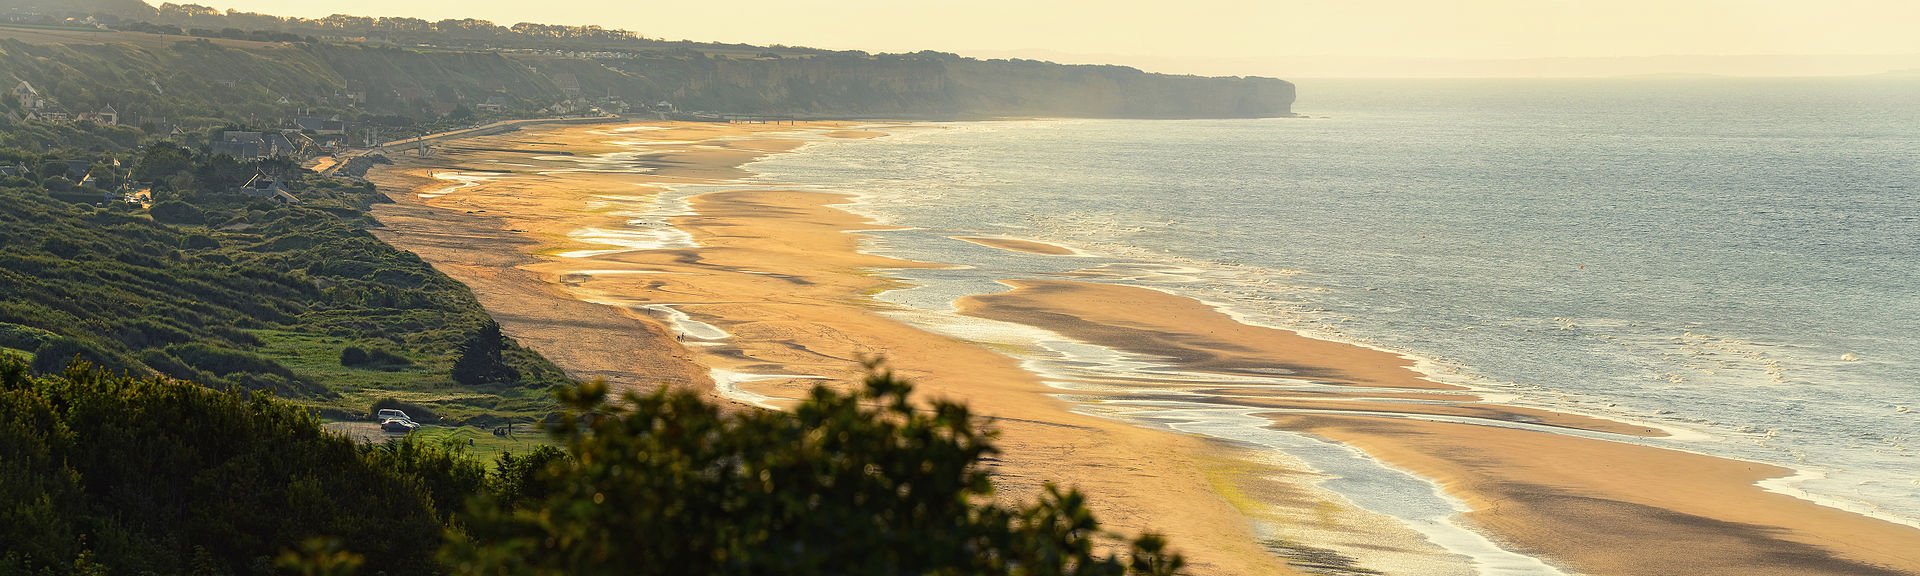 France Just For You - How to spend a day in Normandy